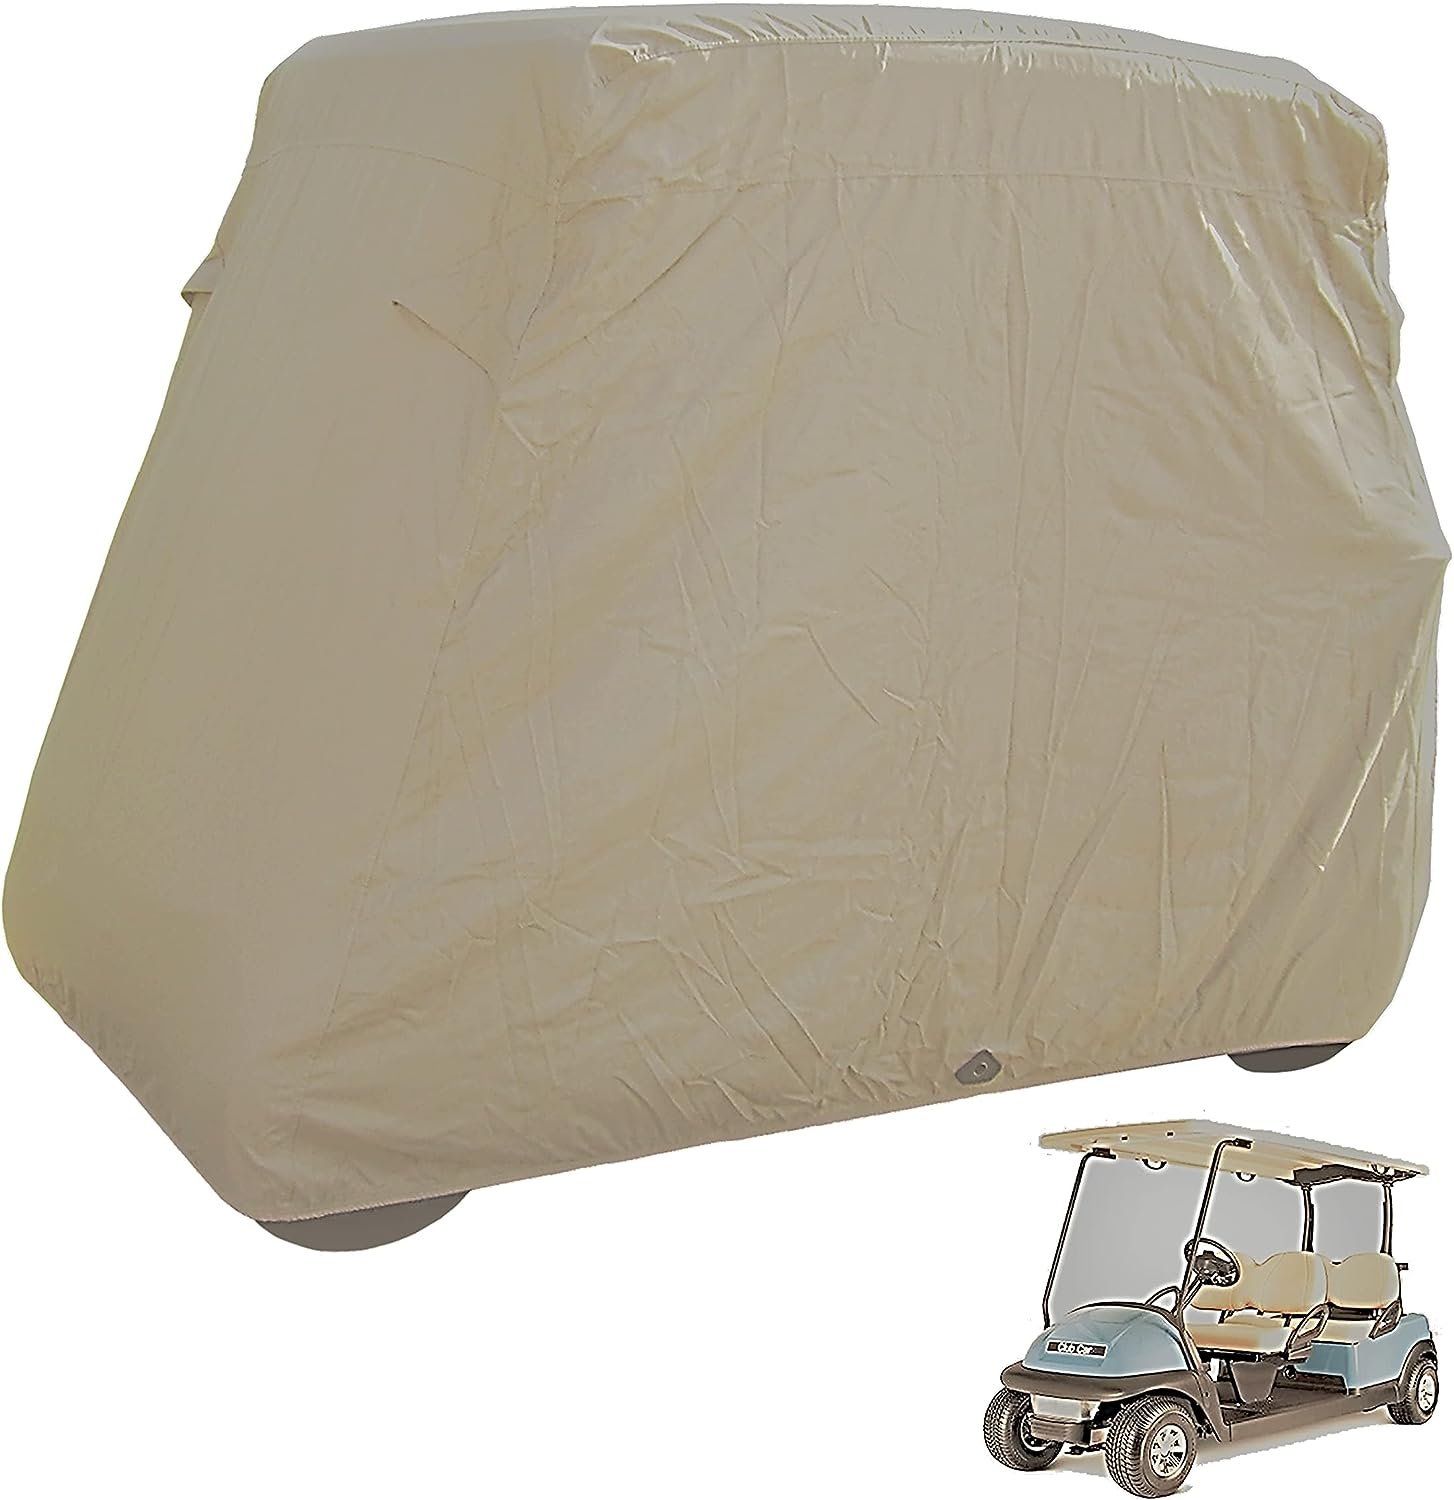 Heavy Duty 4 Passenger Golf Cart Storage Cover Premium Protection for All Weather - Fits 80 Roofs for E Z GO, Club Car, Yamaha G Models, and GEM e2 (Grey, Taupe, or Green)